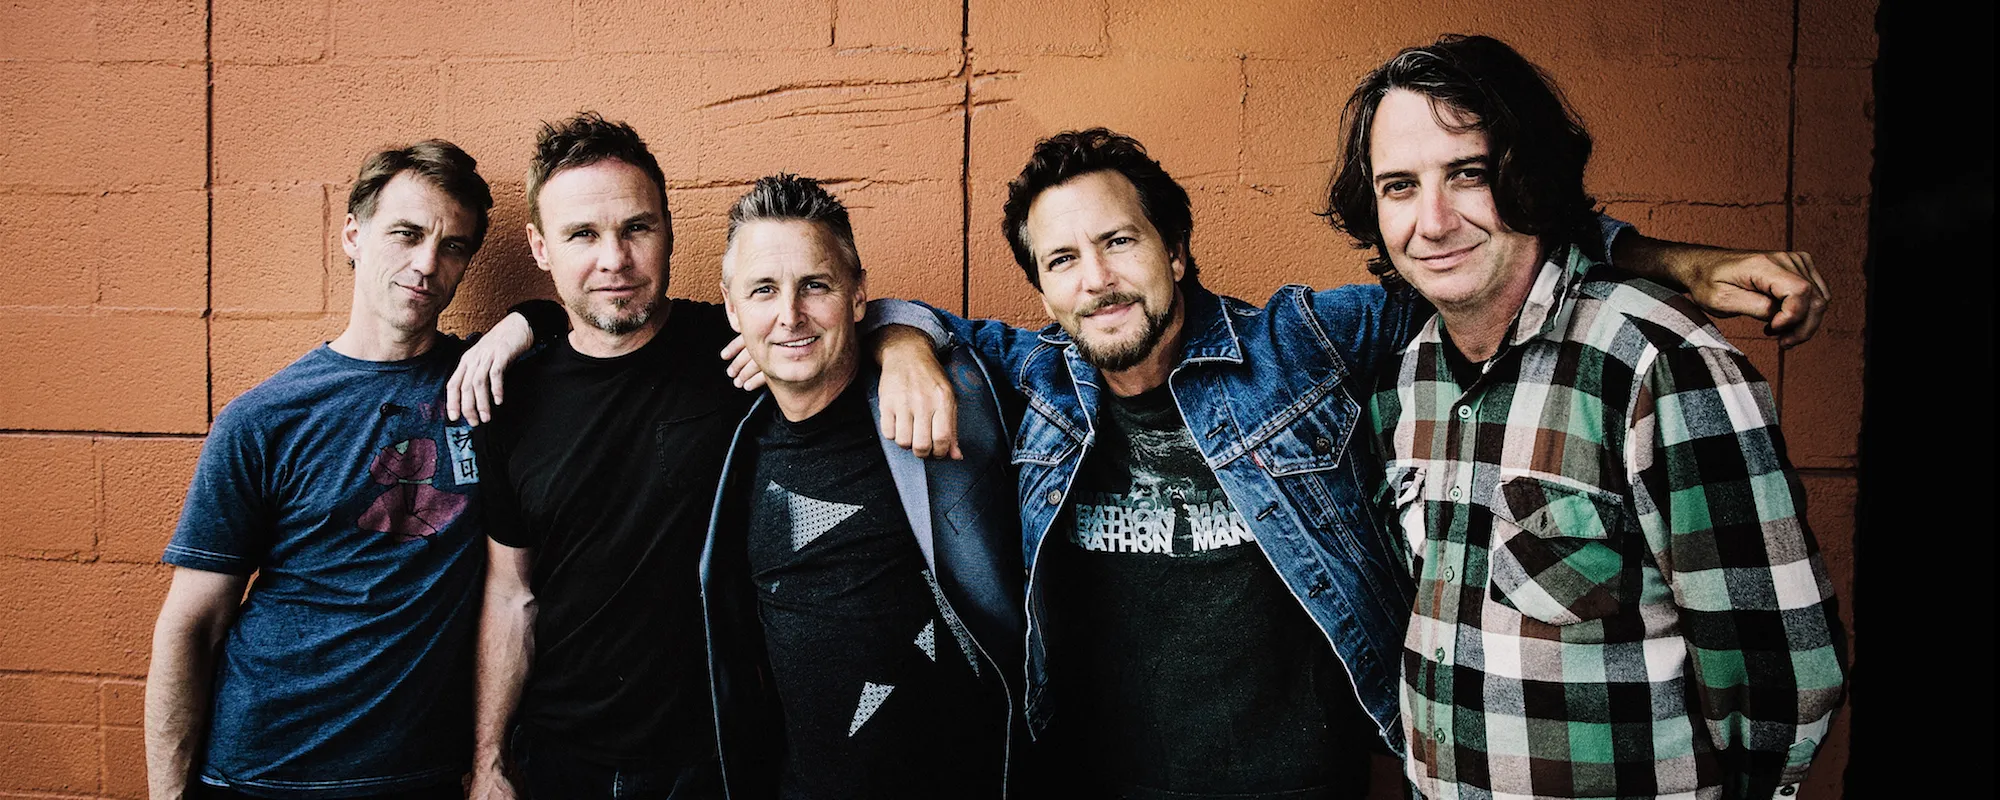 Pearl Jam Guitarist Stone Gossard: “We’re On Our Way, We’re Making Music”